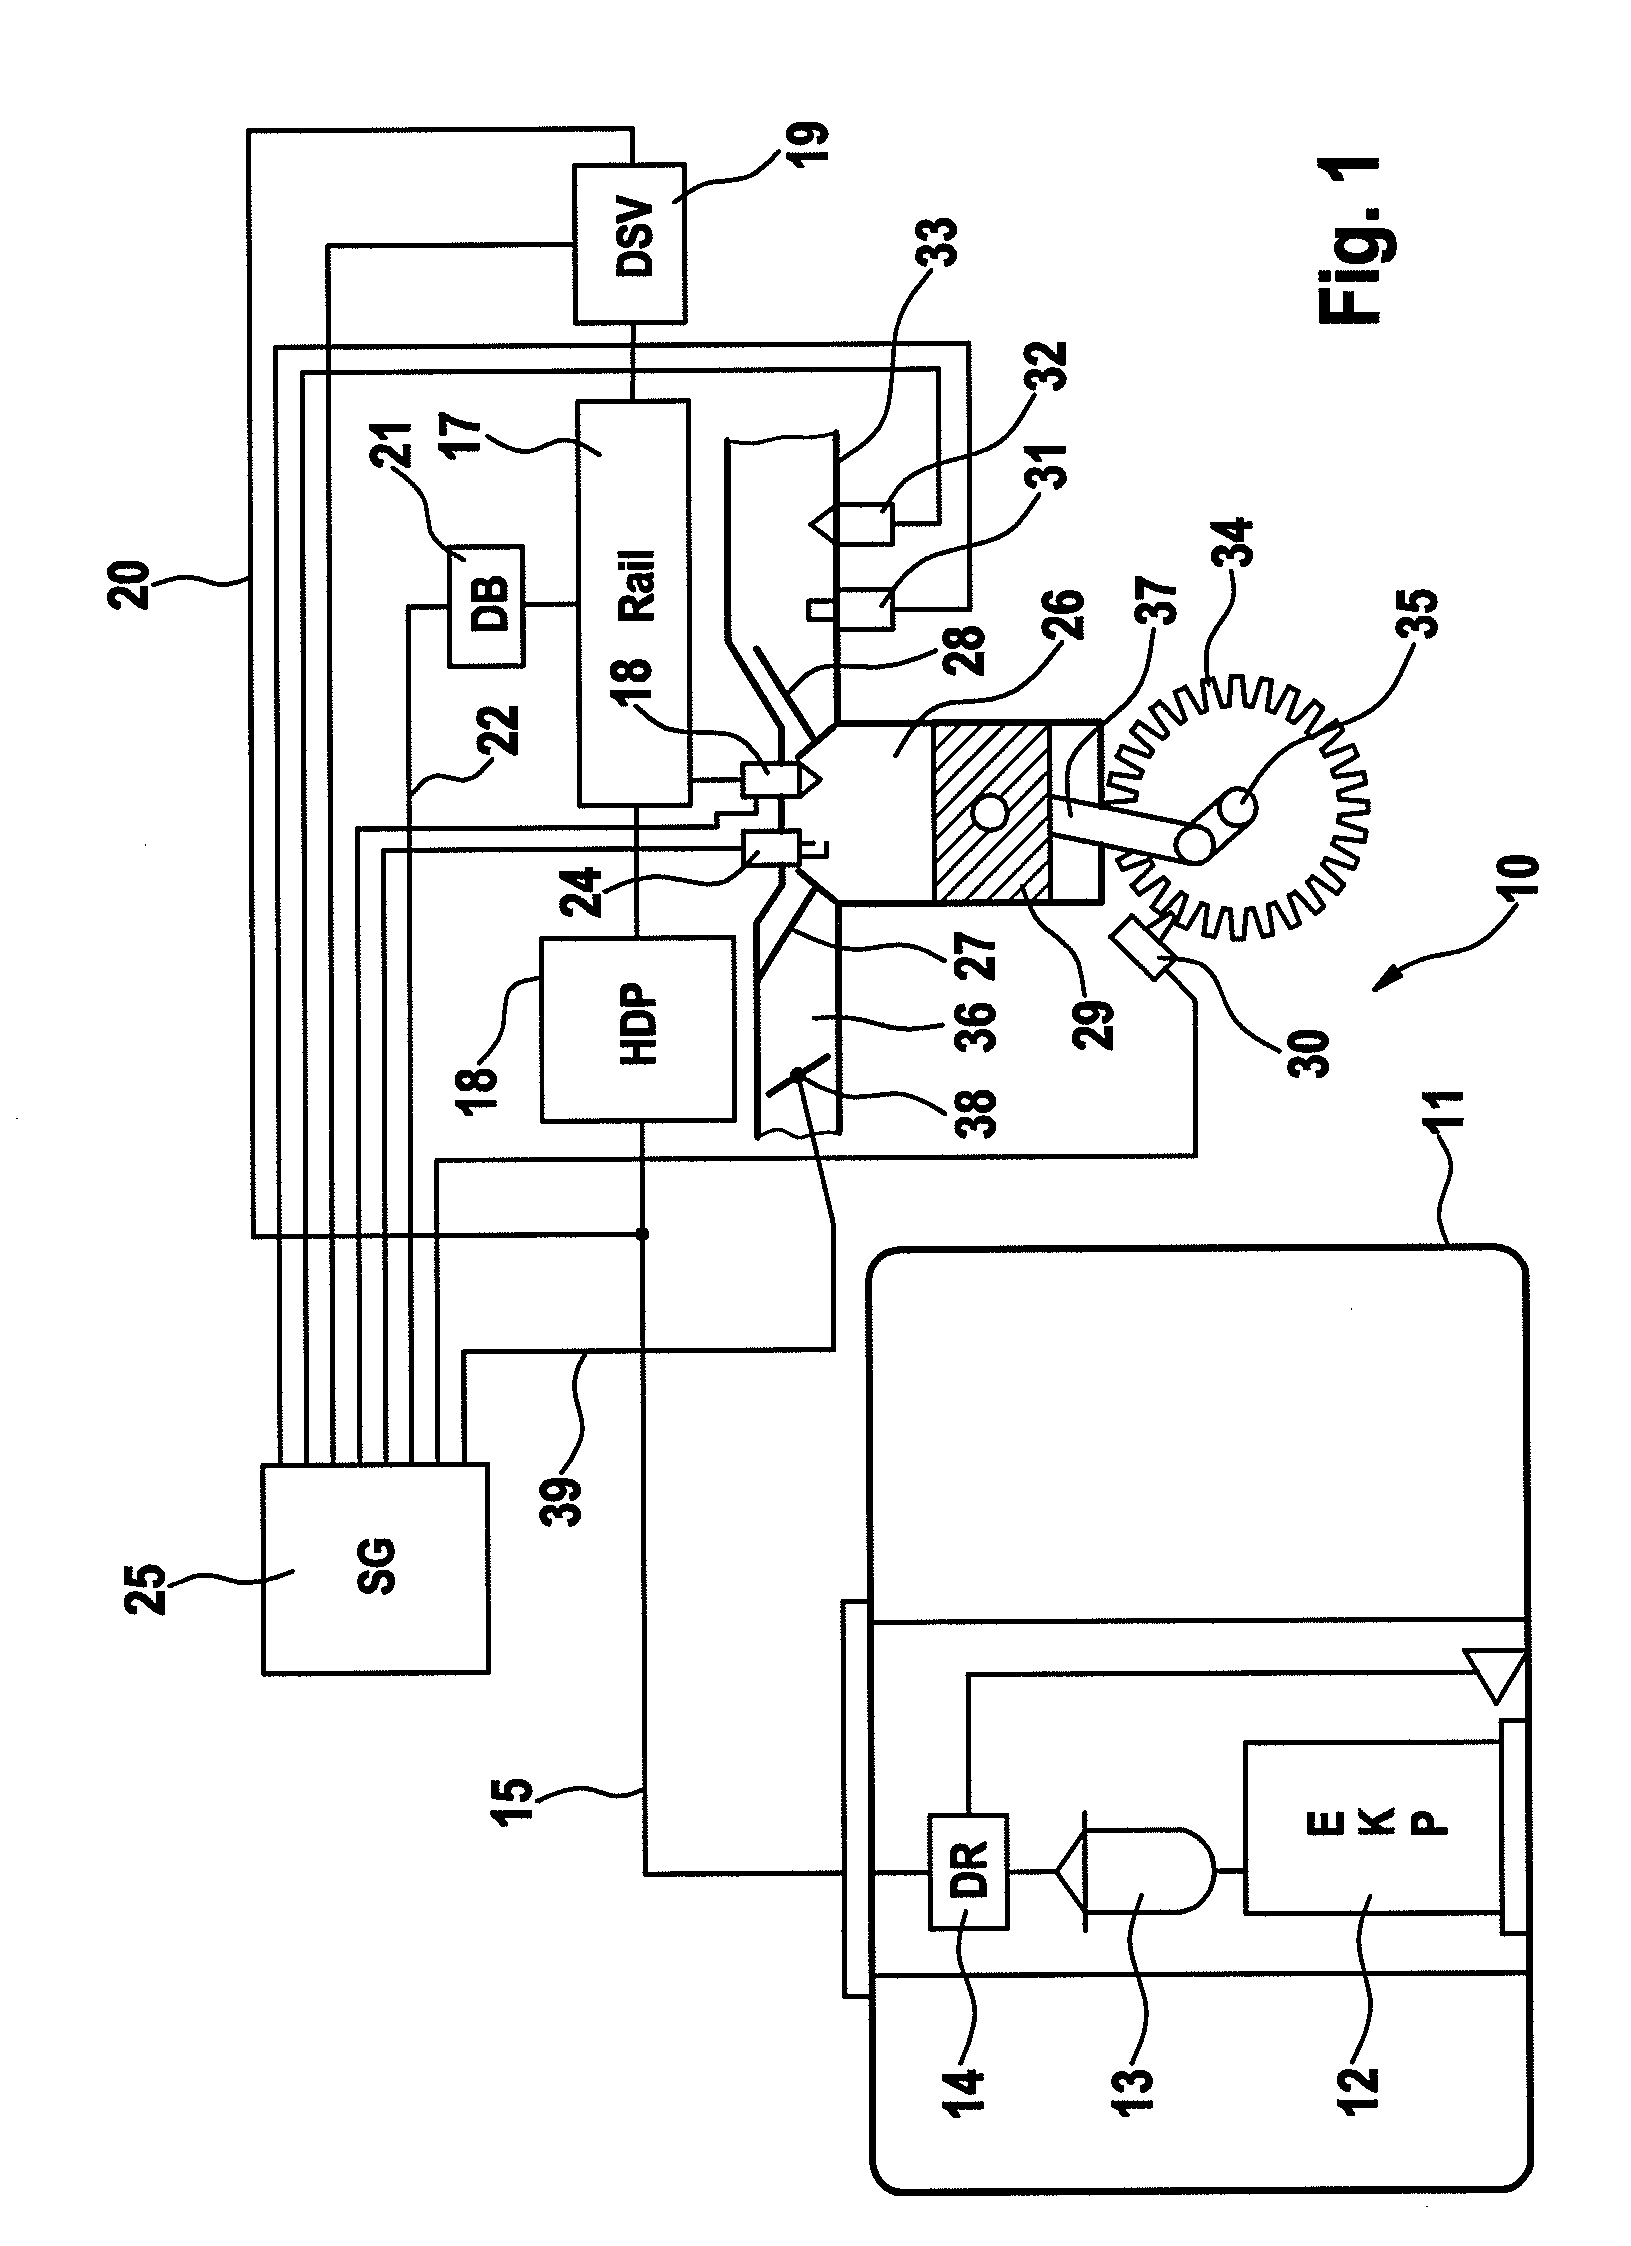 Method for controlling a fuel supply system of an internal combustion engine